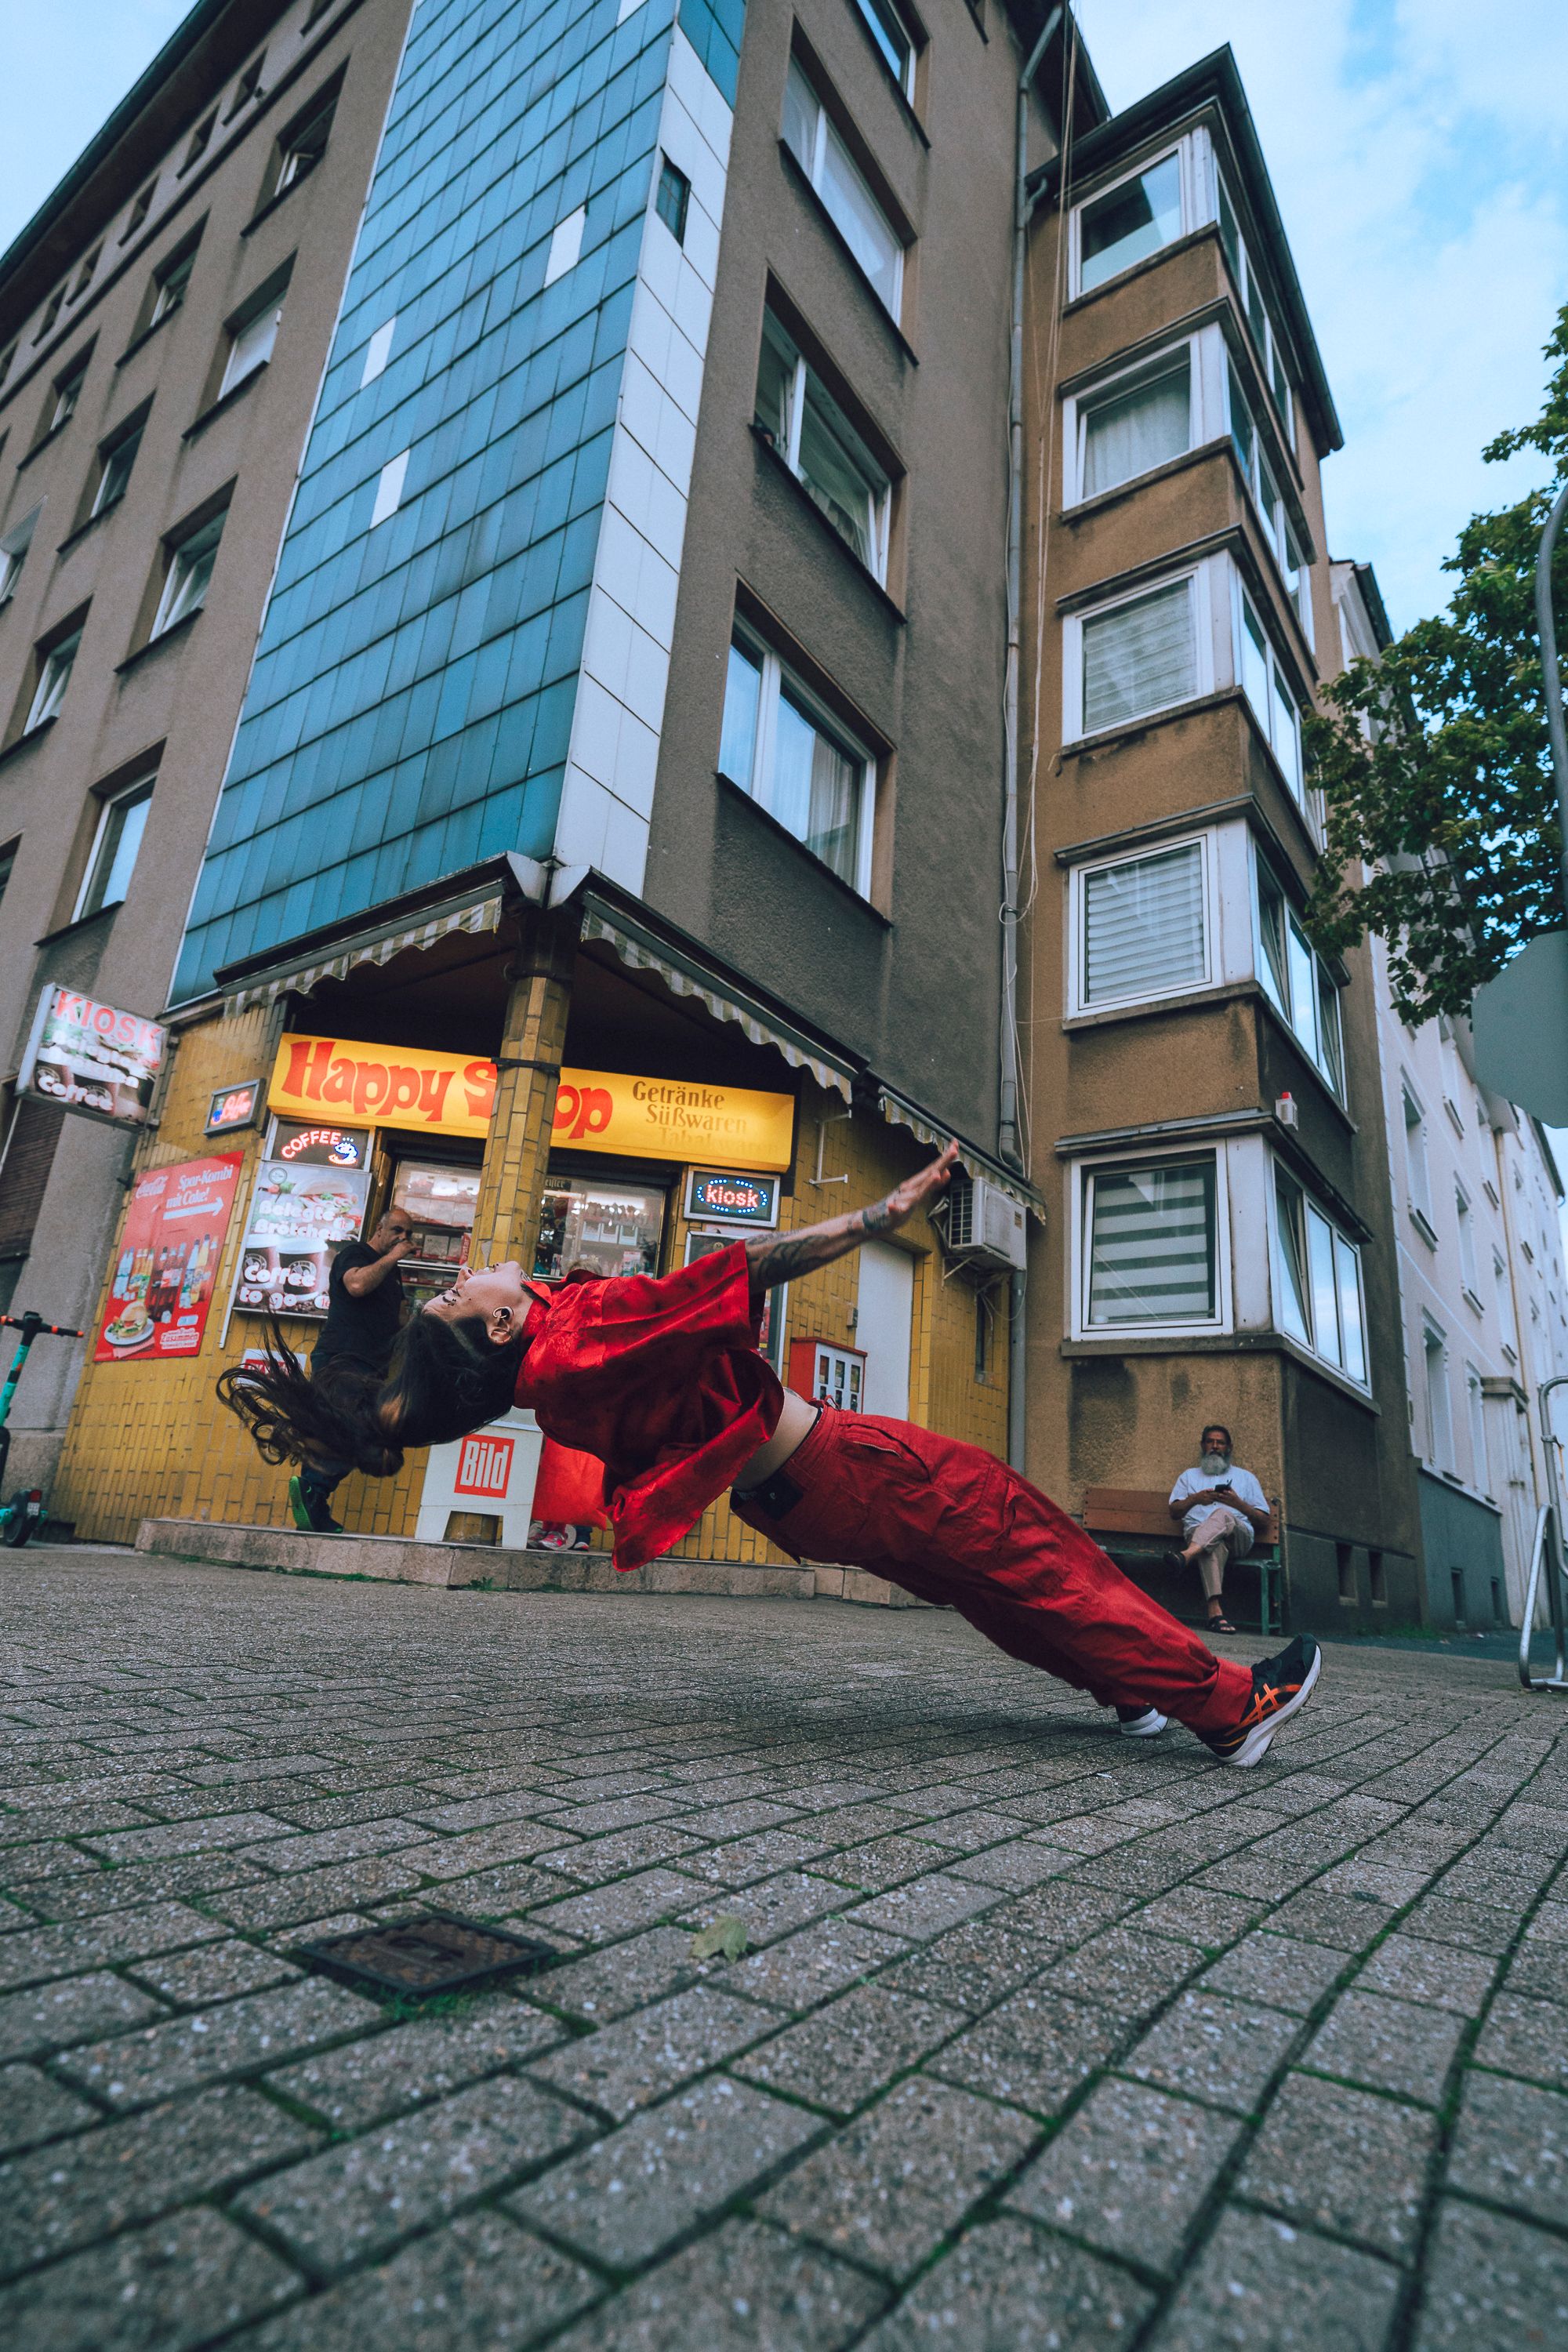 There is a dancer dressed in red, in front of a shop. She is leaning back with her body.